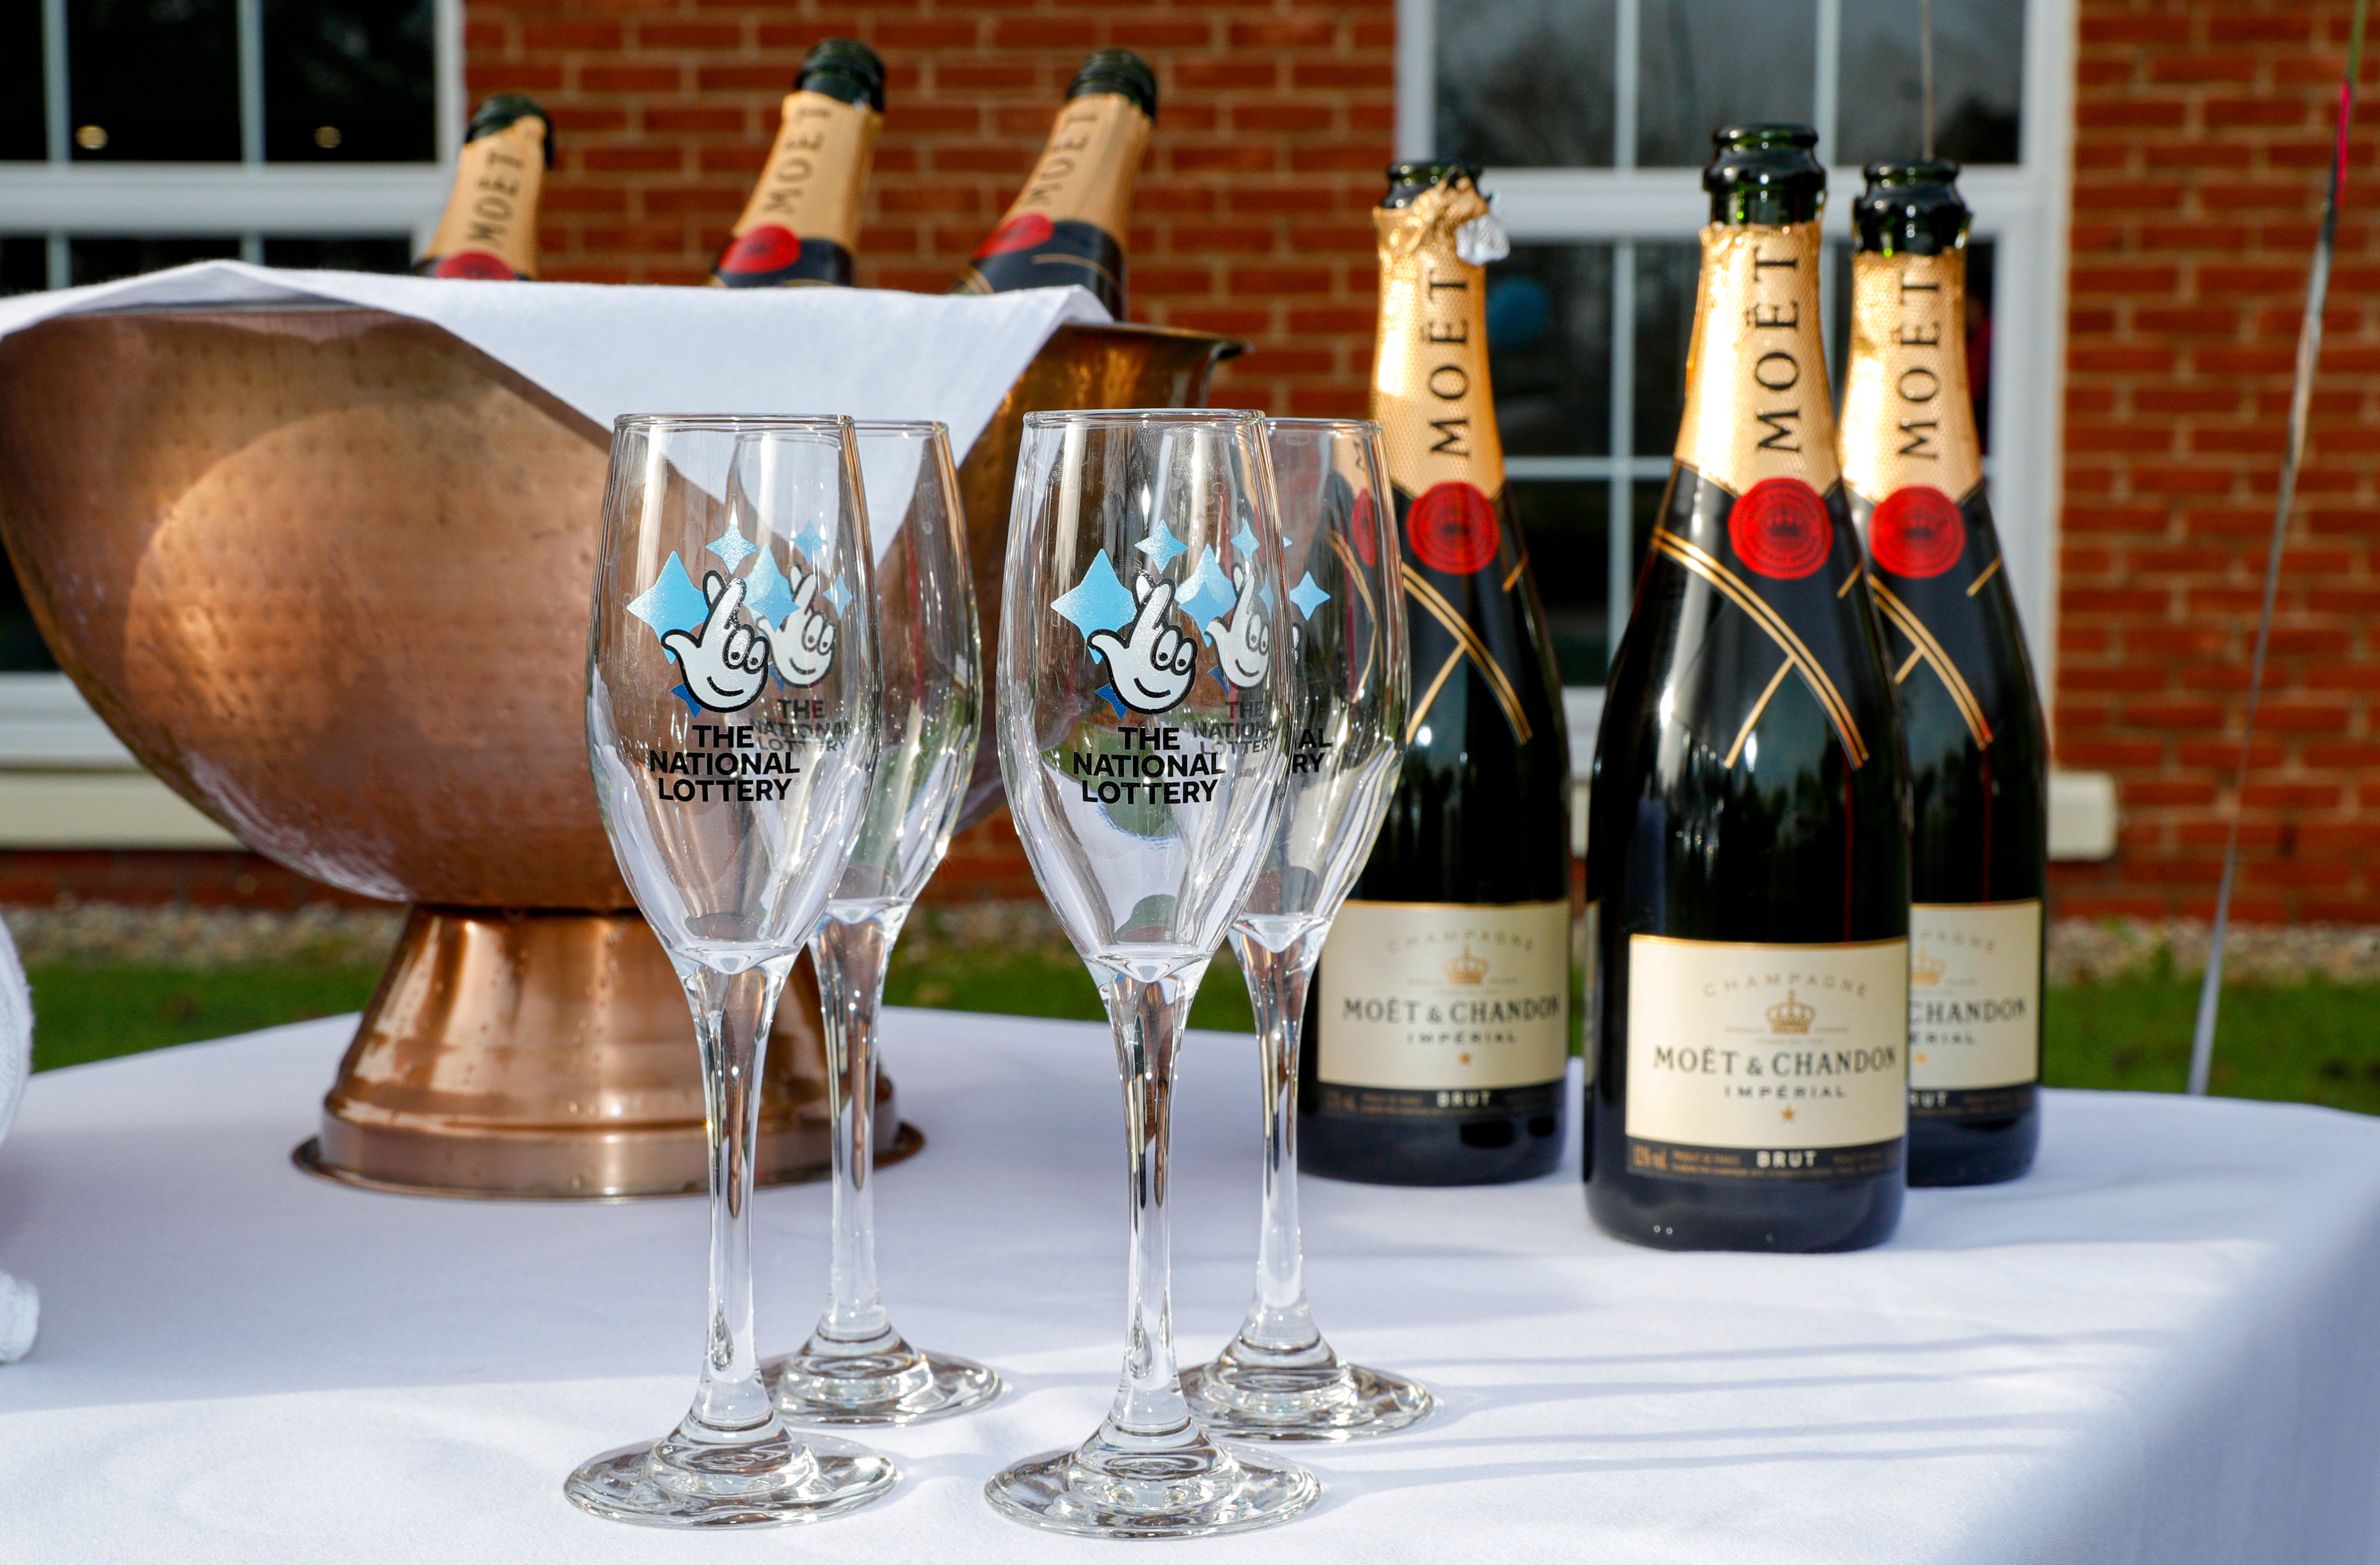 Bottles of Moet & Chandon champagne with The National Lottery branded champagne flutes (Peter Byrne/PA)